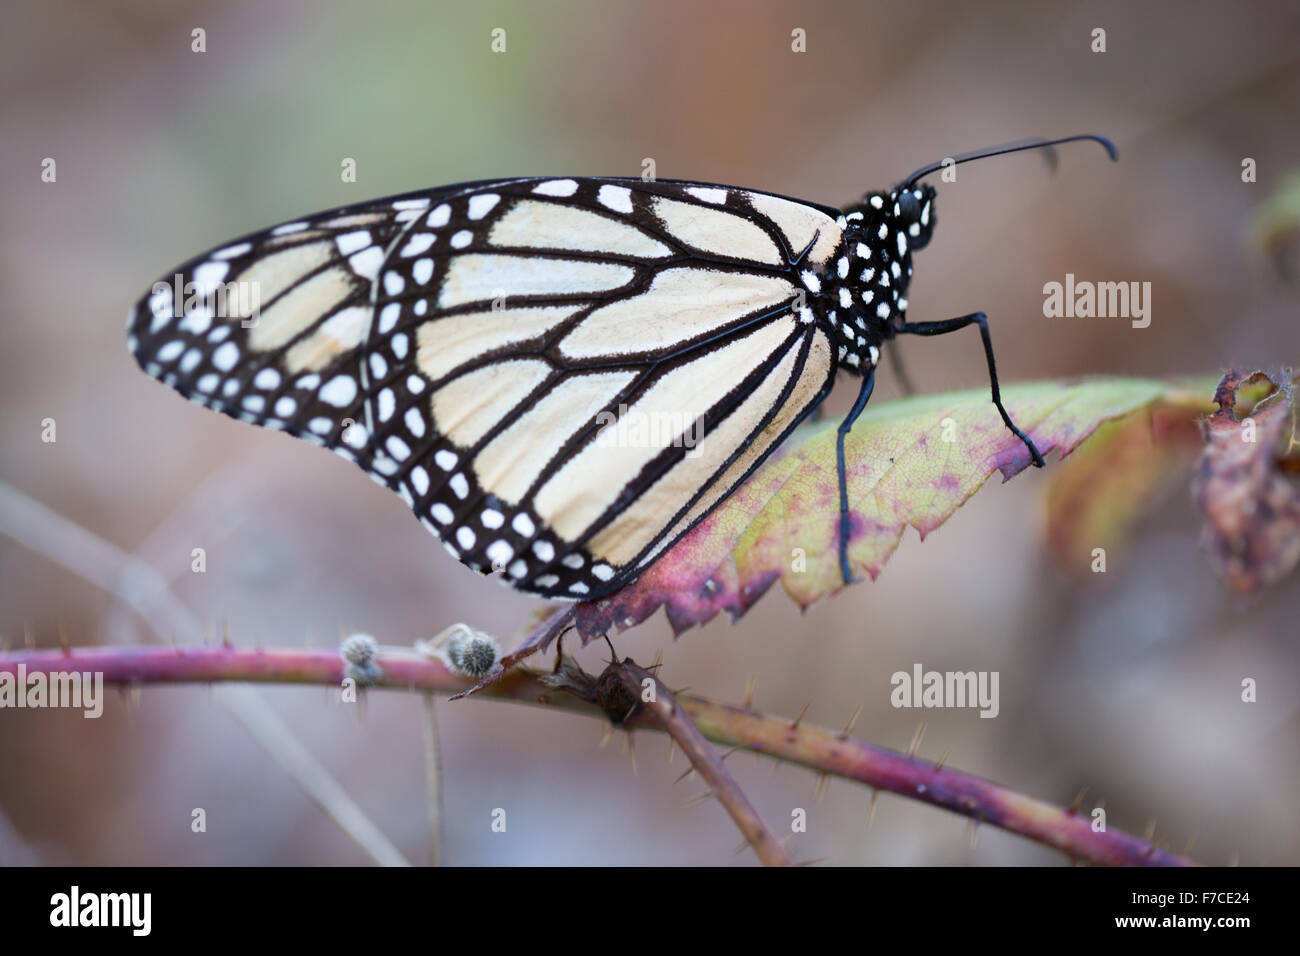 Monarch butterfly perched on a dry leaf Stock Photo